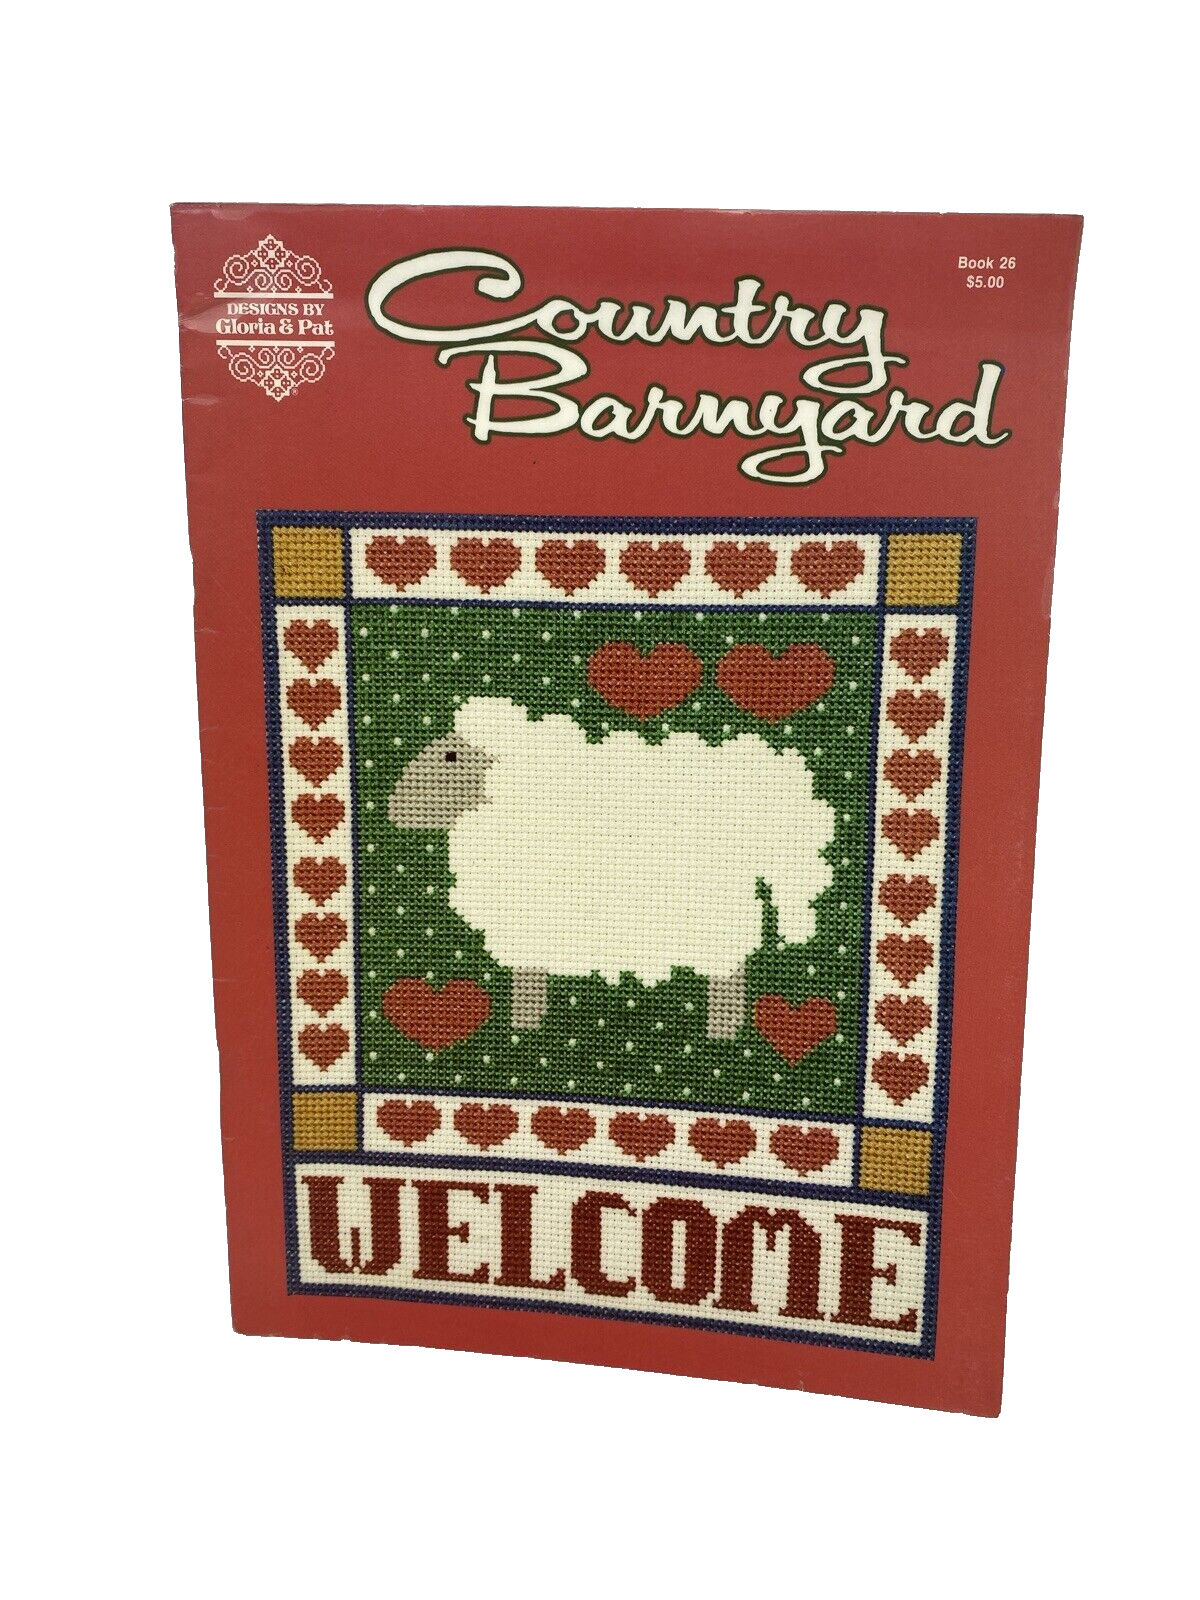 PAT & GLORIA COUNTED CROSS STITCH PATTERN BOOK COUNTRY BARNYARD #26 1984 OOP  - $9.89